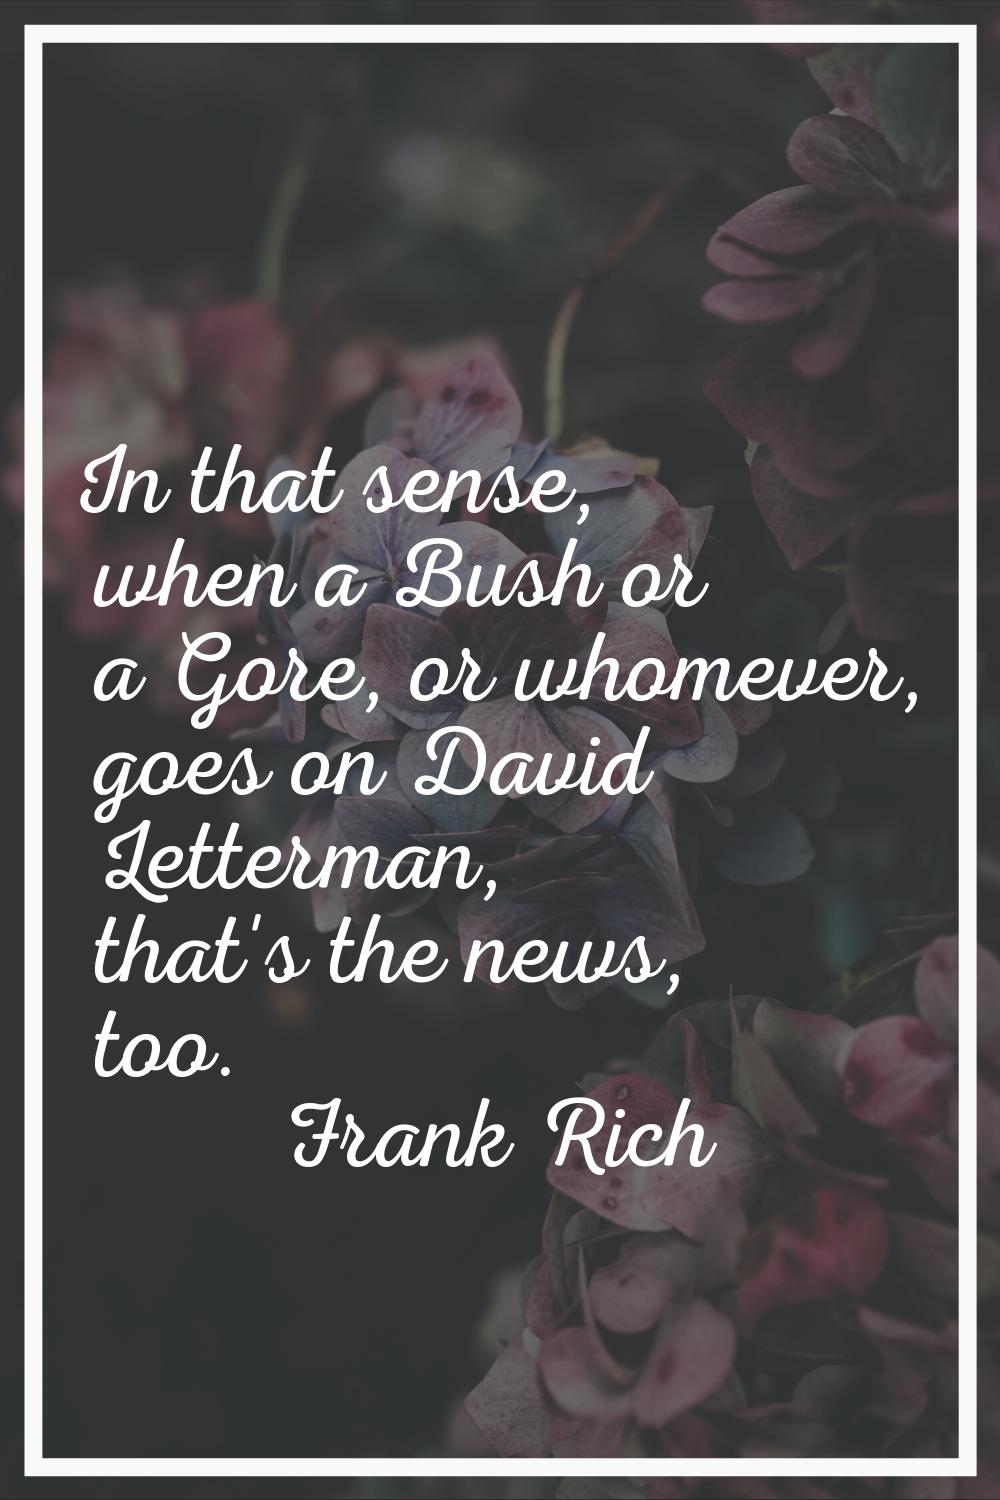 In that sense, when a Bush or a Gore, or whomever, goes on David Letterman, that's the news, too.